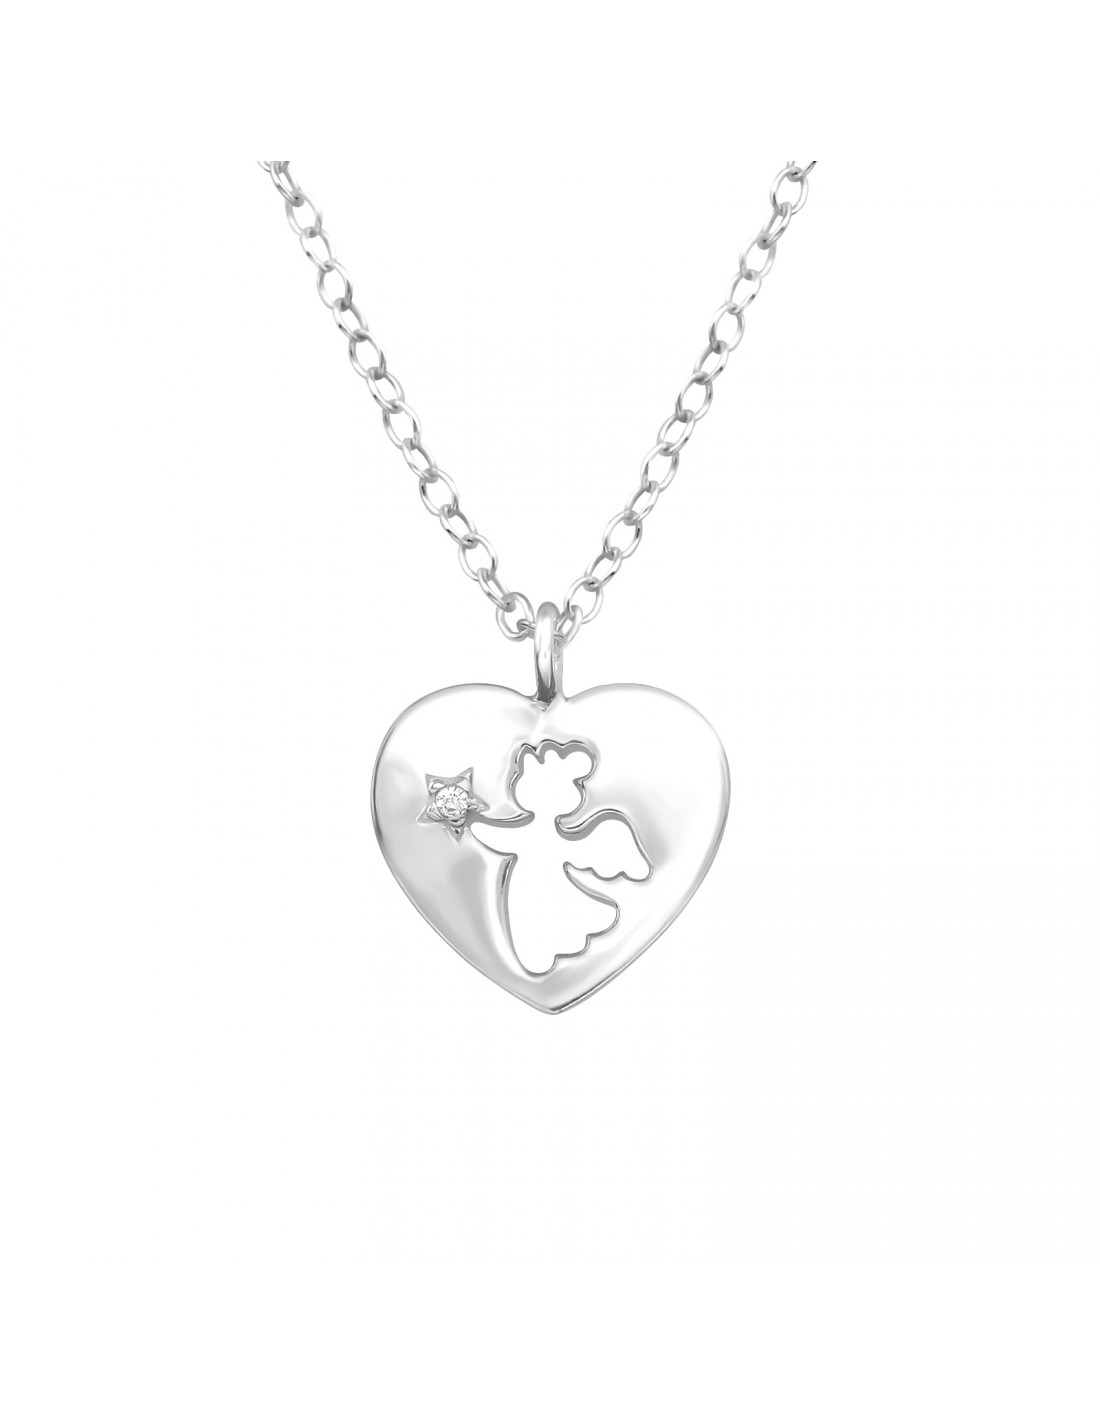 Heart Locket Necklace Angel & Crystals Sterling Silver